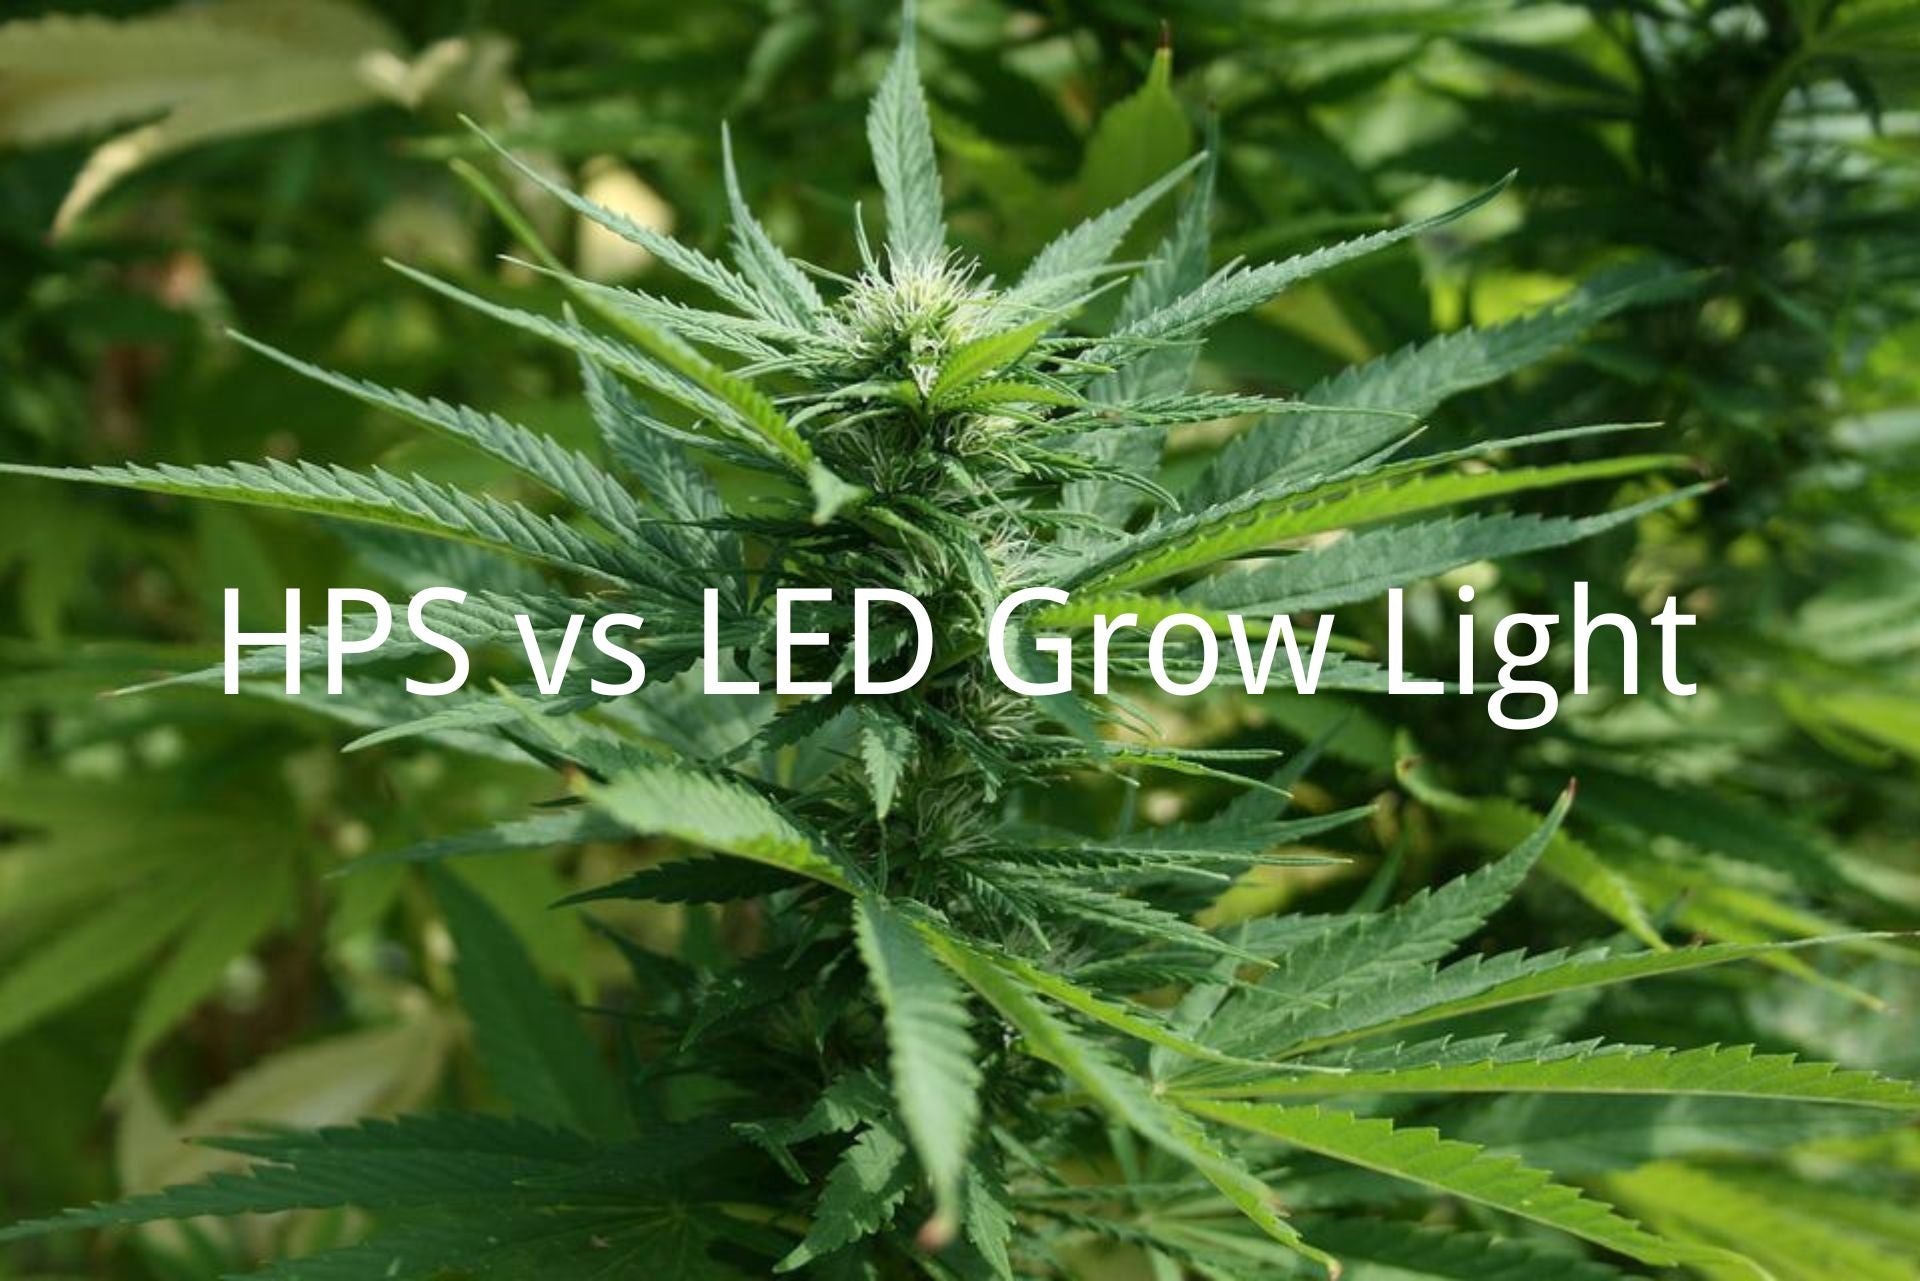 Tips for How to LED Light |